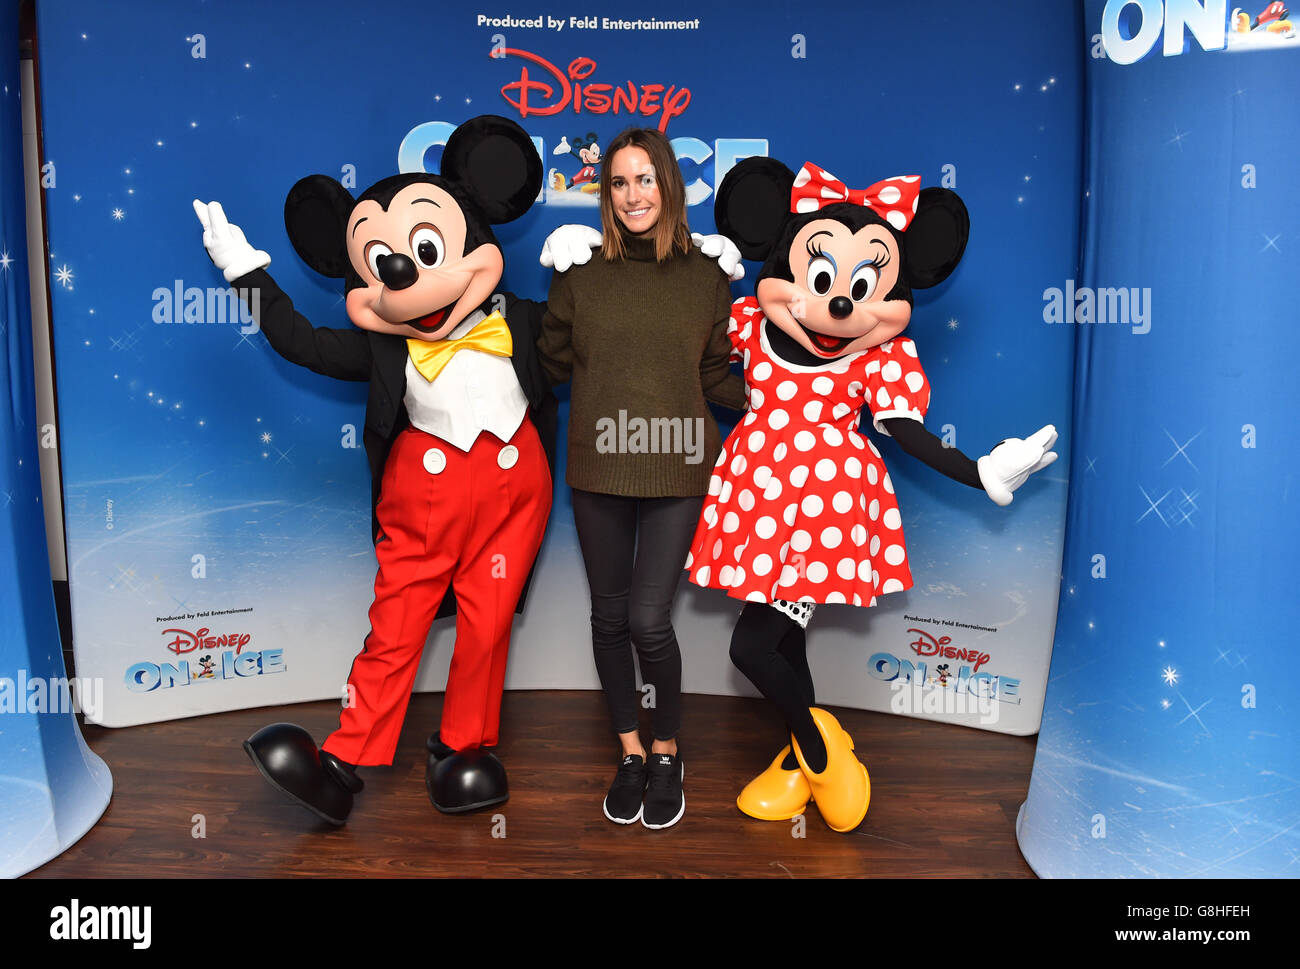 Louise Roe poses with Mickey and Minnie Mouse at the opening night of Disney On Ice presents Worlds of Enchantment at the O2 Arena in London. Stock Photo